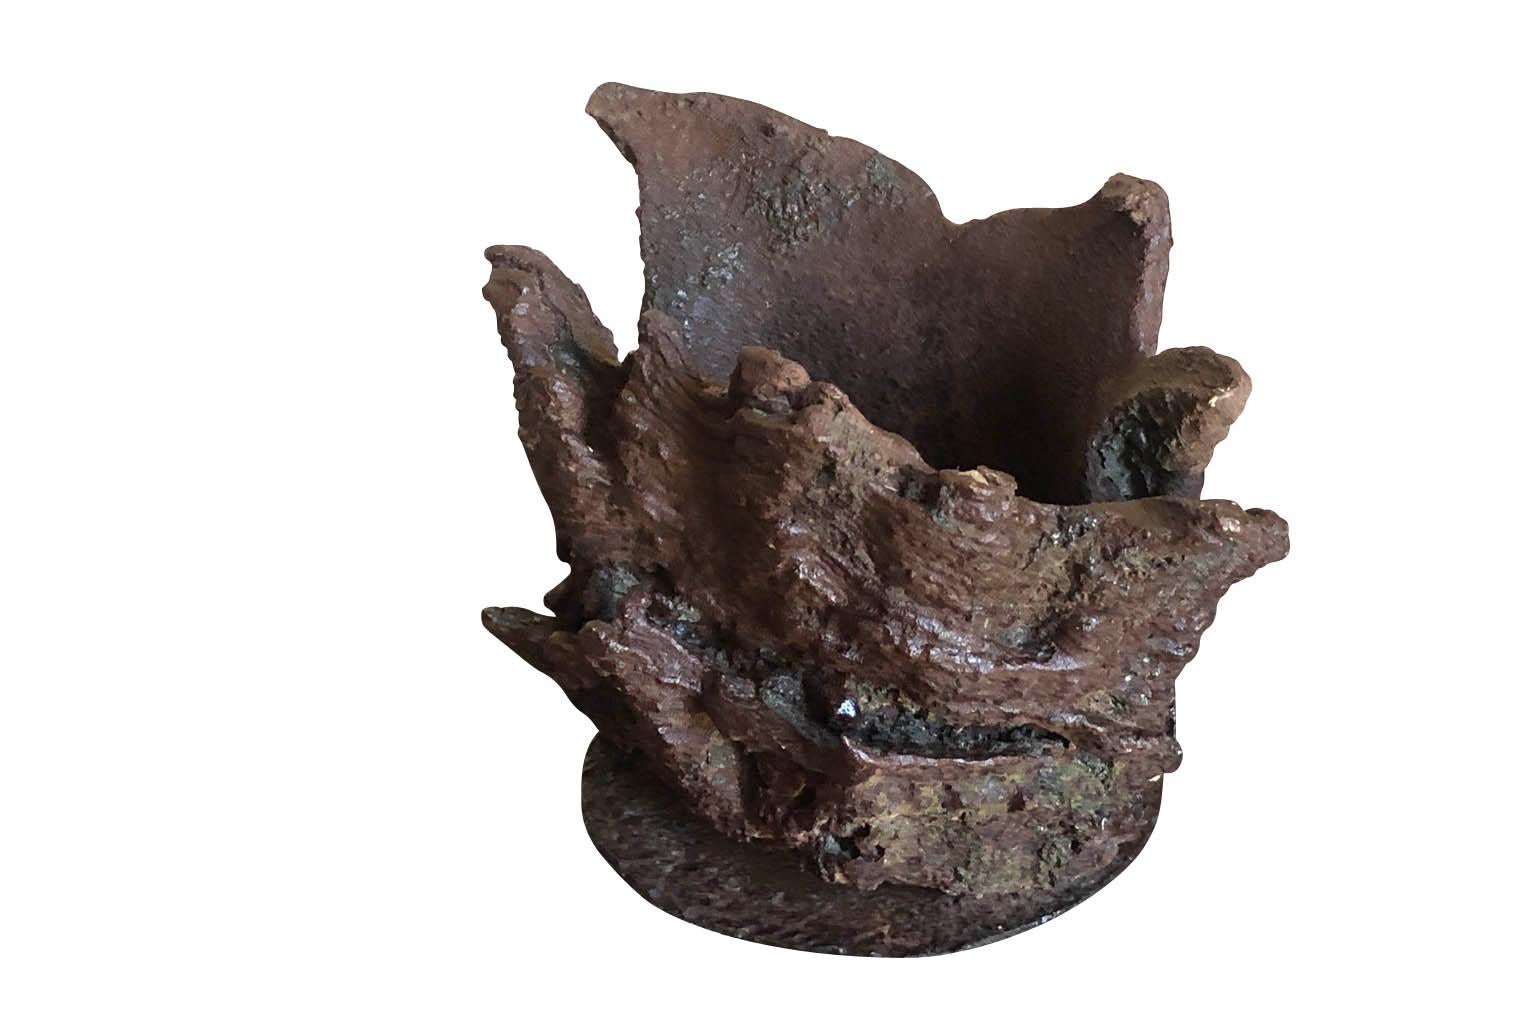 A very intriguing French mid-20th century artist sculpture in iron. A wonderful cachepot or vessel.